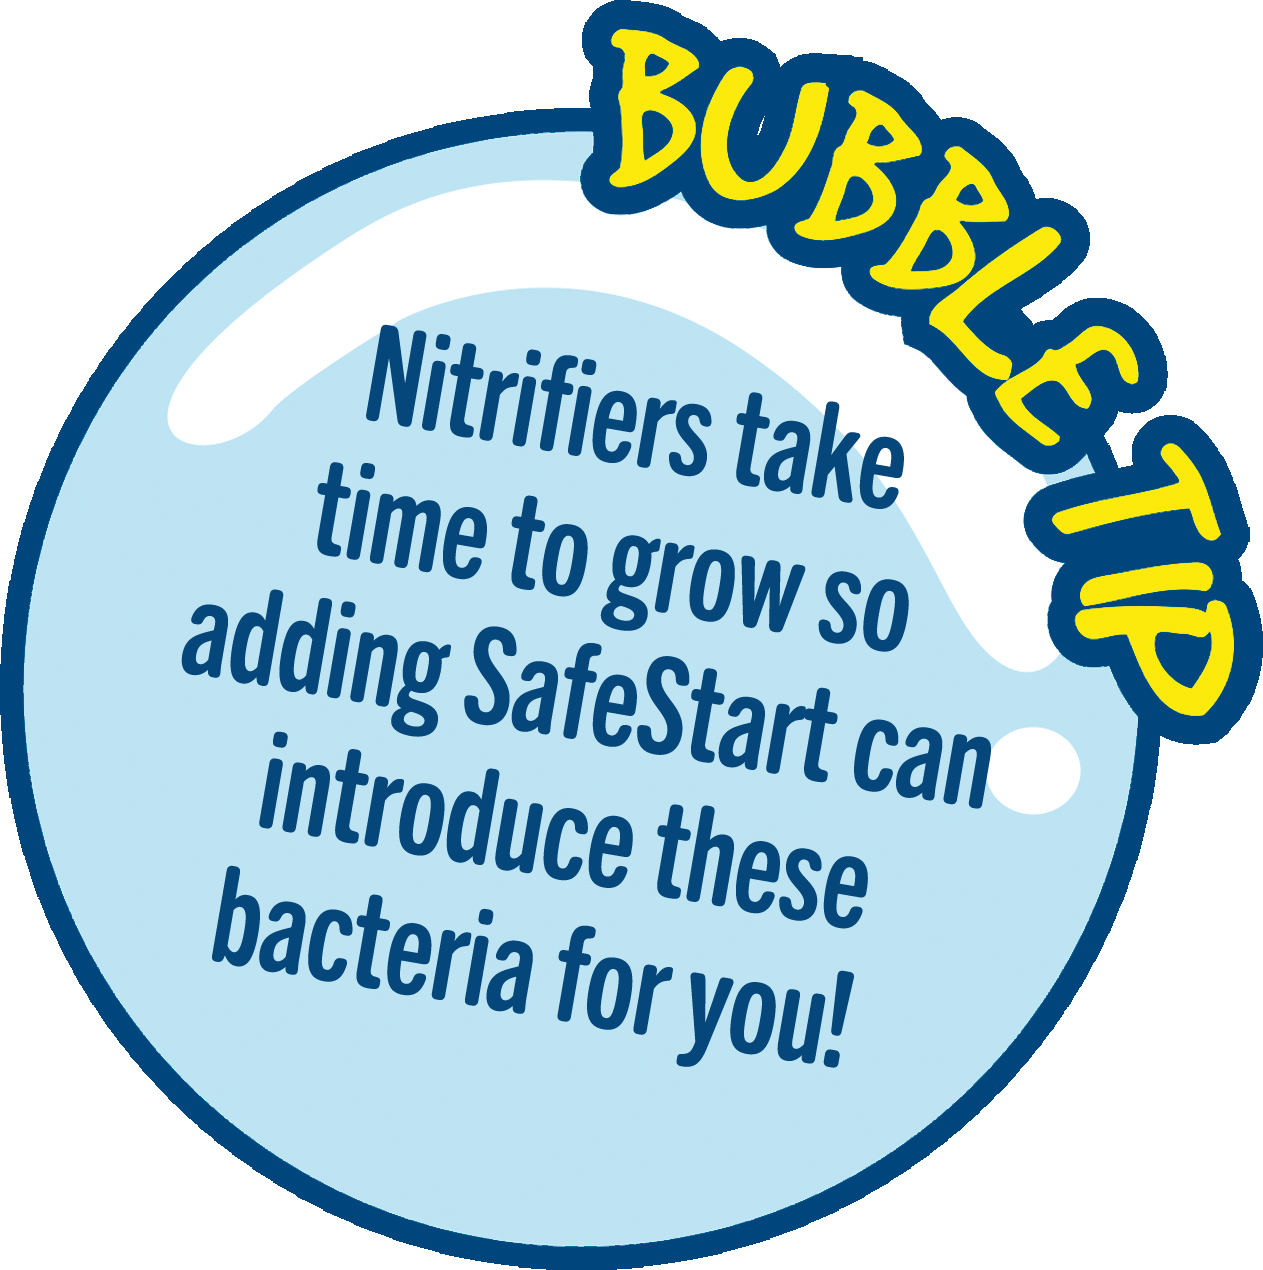 Nitrifiers take time to grow so adding SafeStart can introduce these bacteria for you!